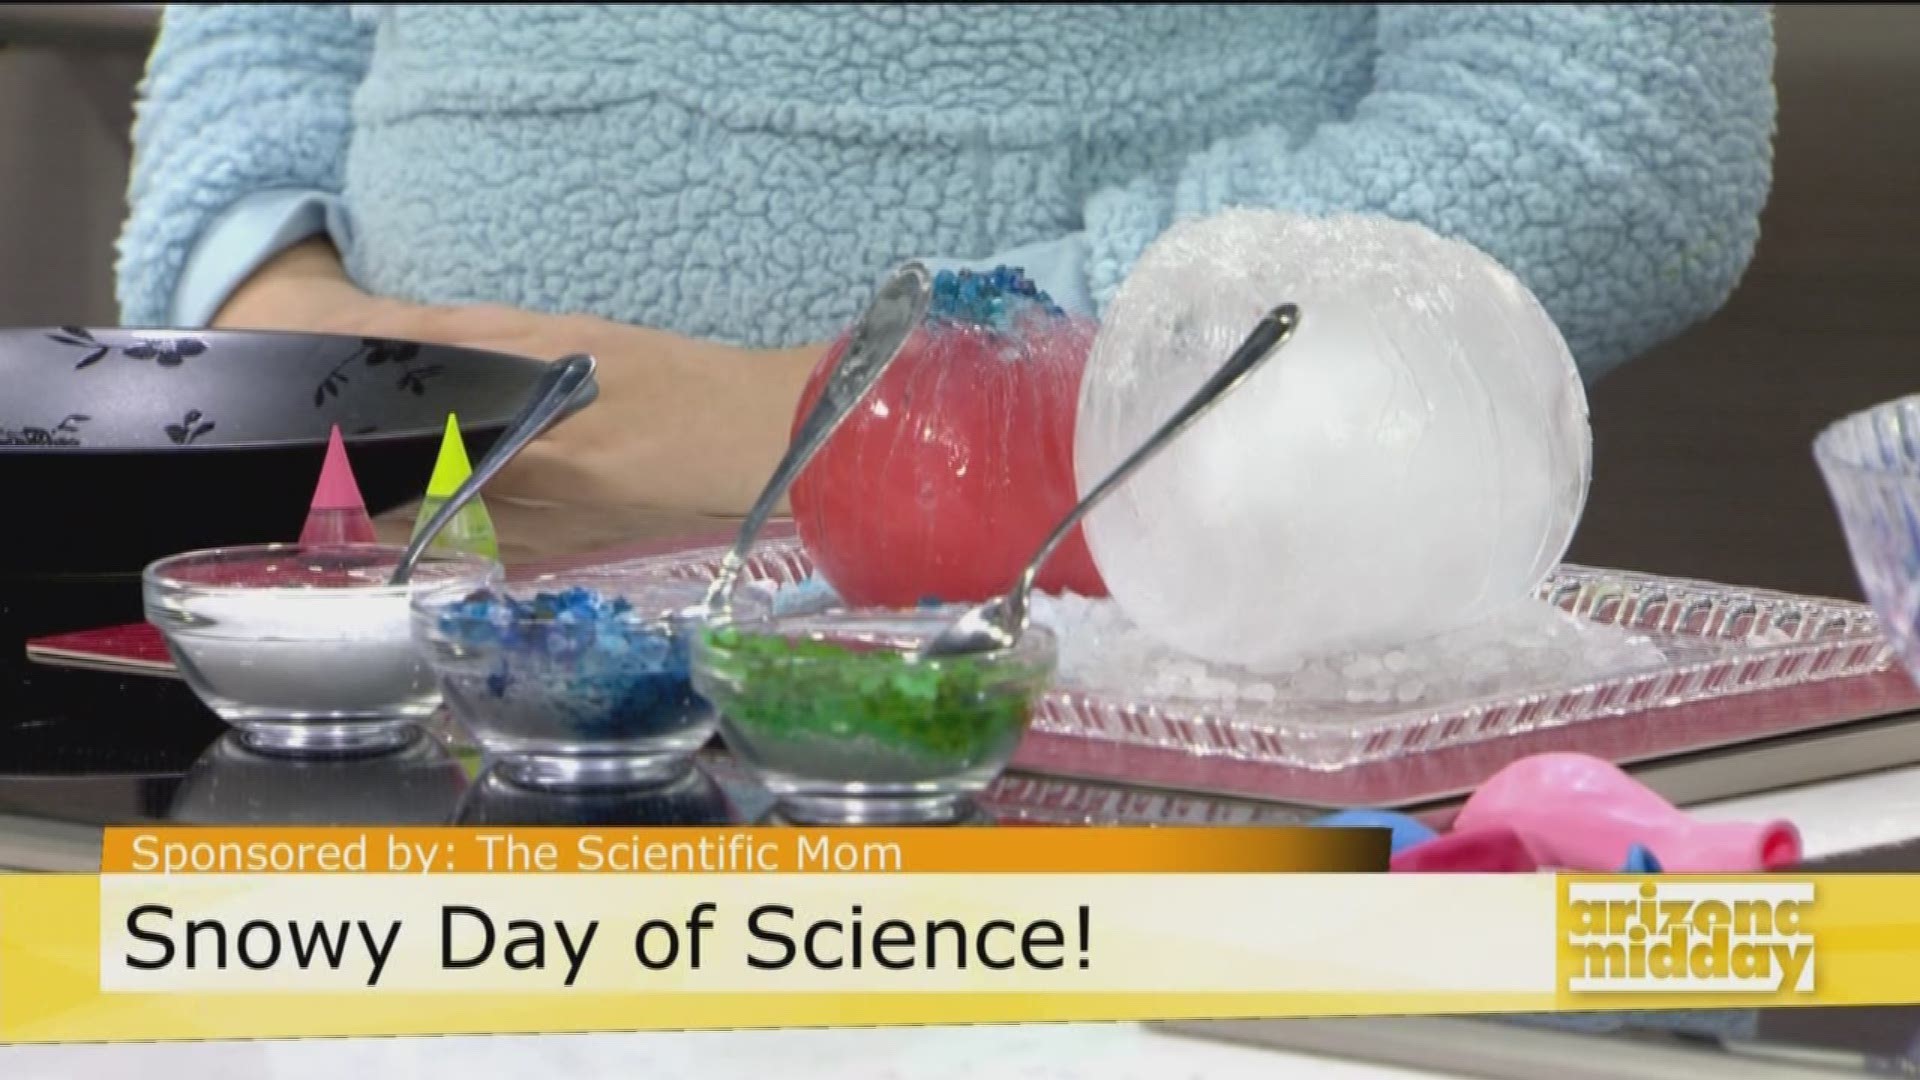 The Scientific Mom Amy Oyler and her daughter Katie show us how to make snow at home!